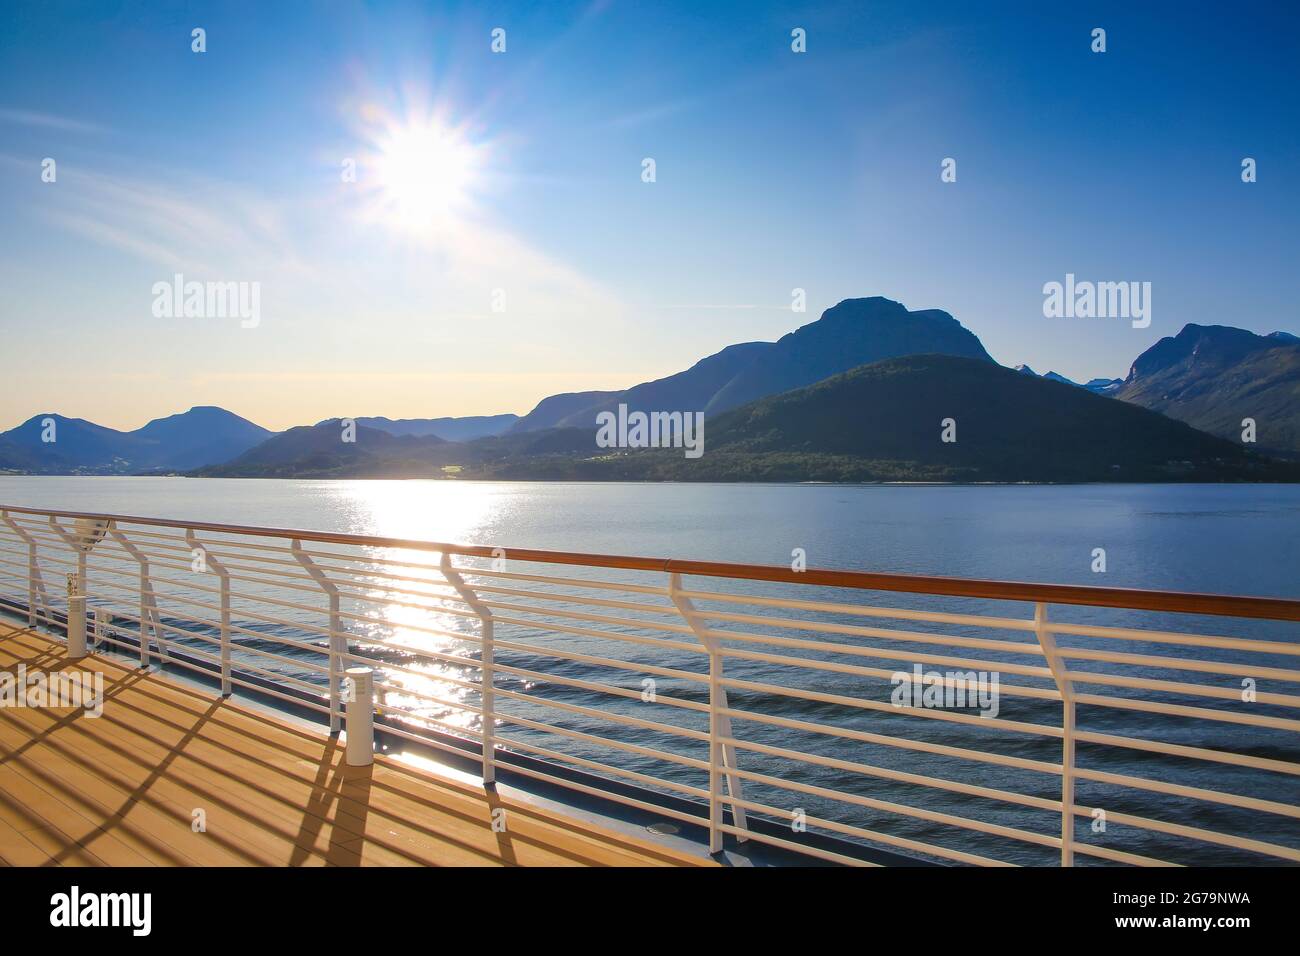 Cruise towards Geiranger fjord on a beautiful day with views of the Norweigan mountains from the open promenade deck of the ship, Norway. Sunset over Stock Photo